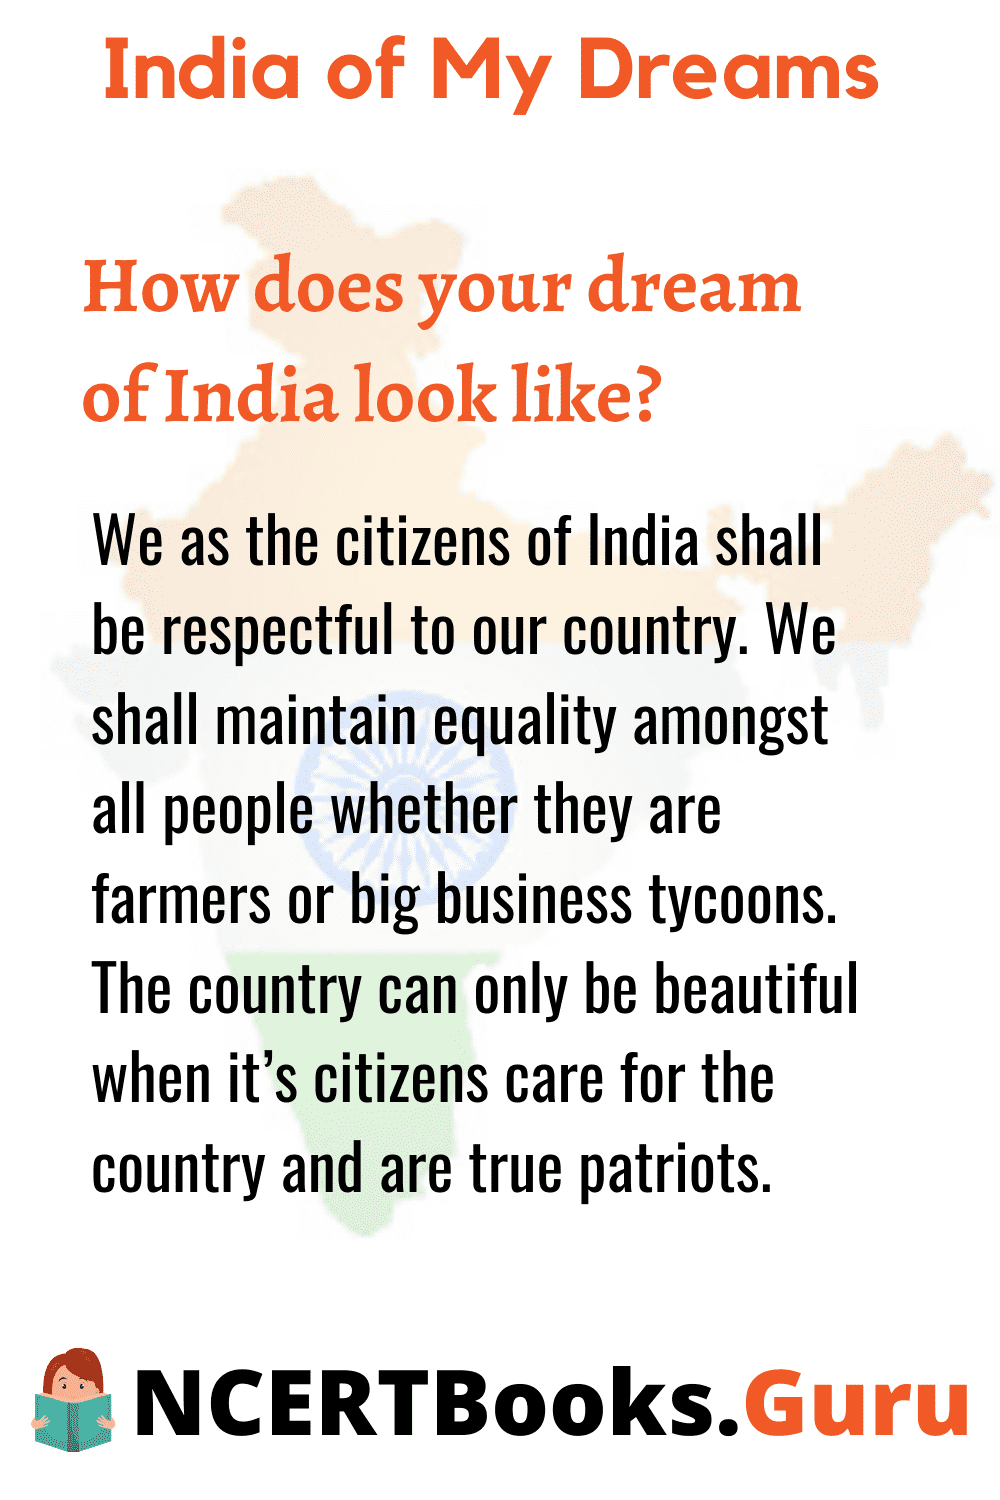 dreams of youth in india essay